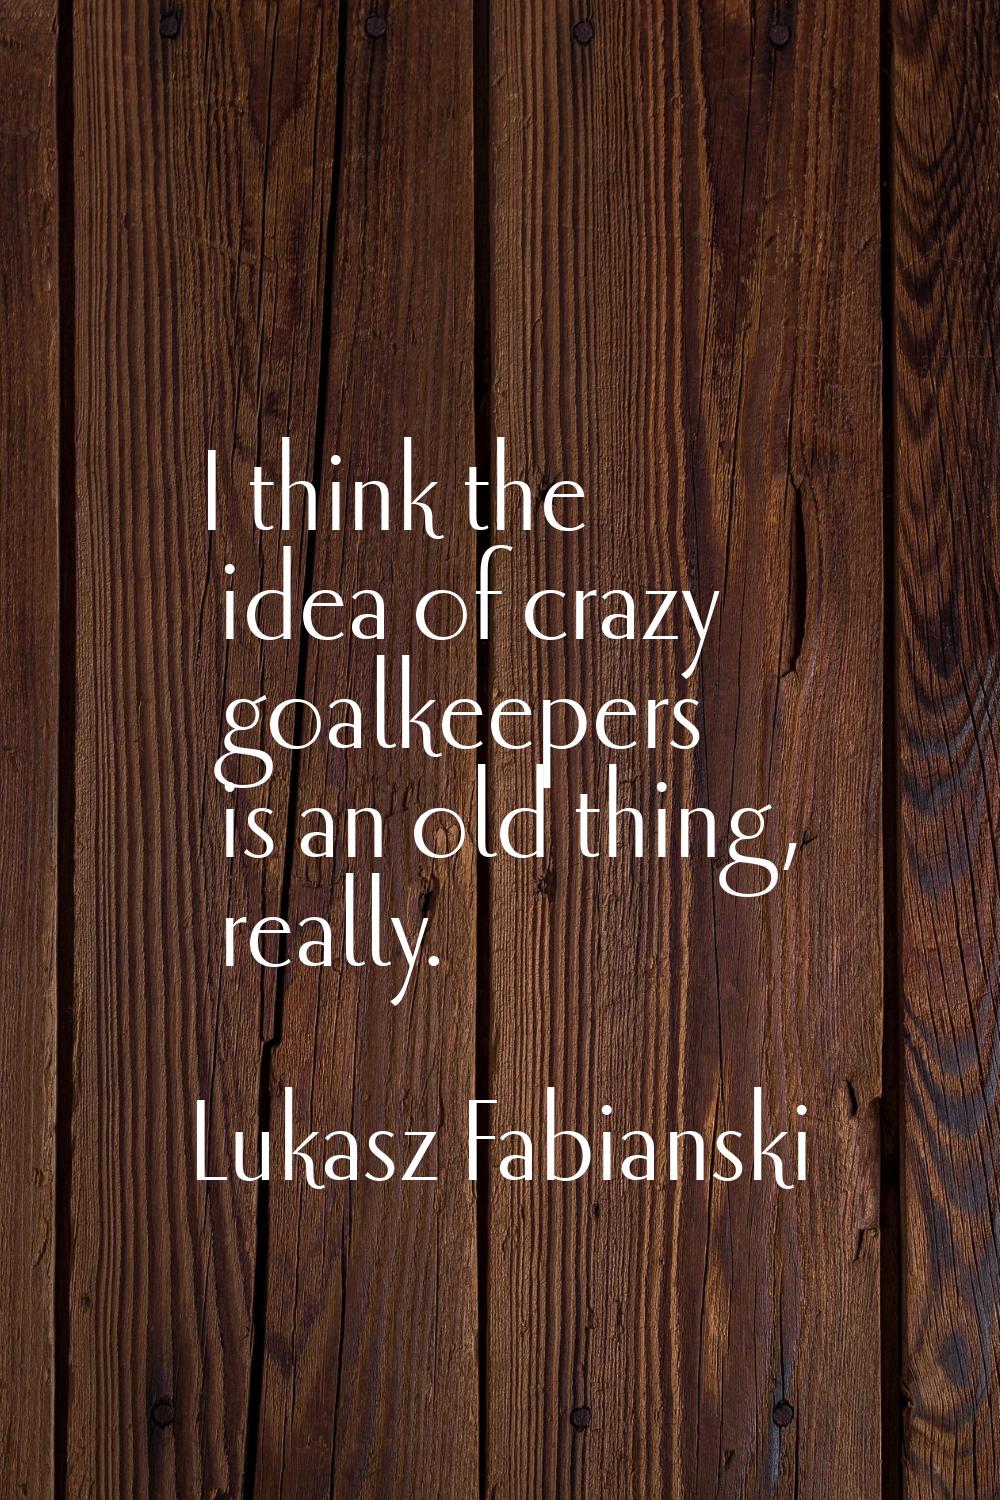 I think the idea of crazy goalkeepers is an old thing, really.